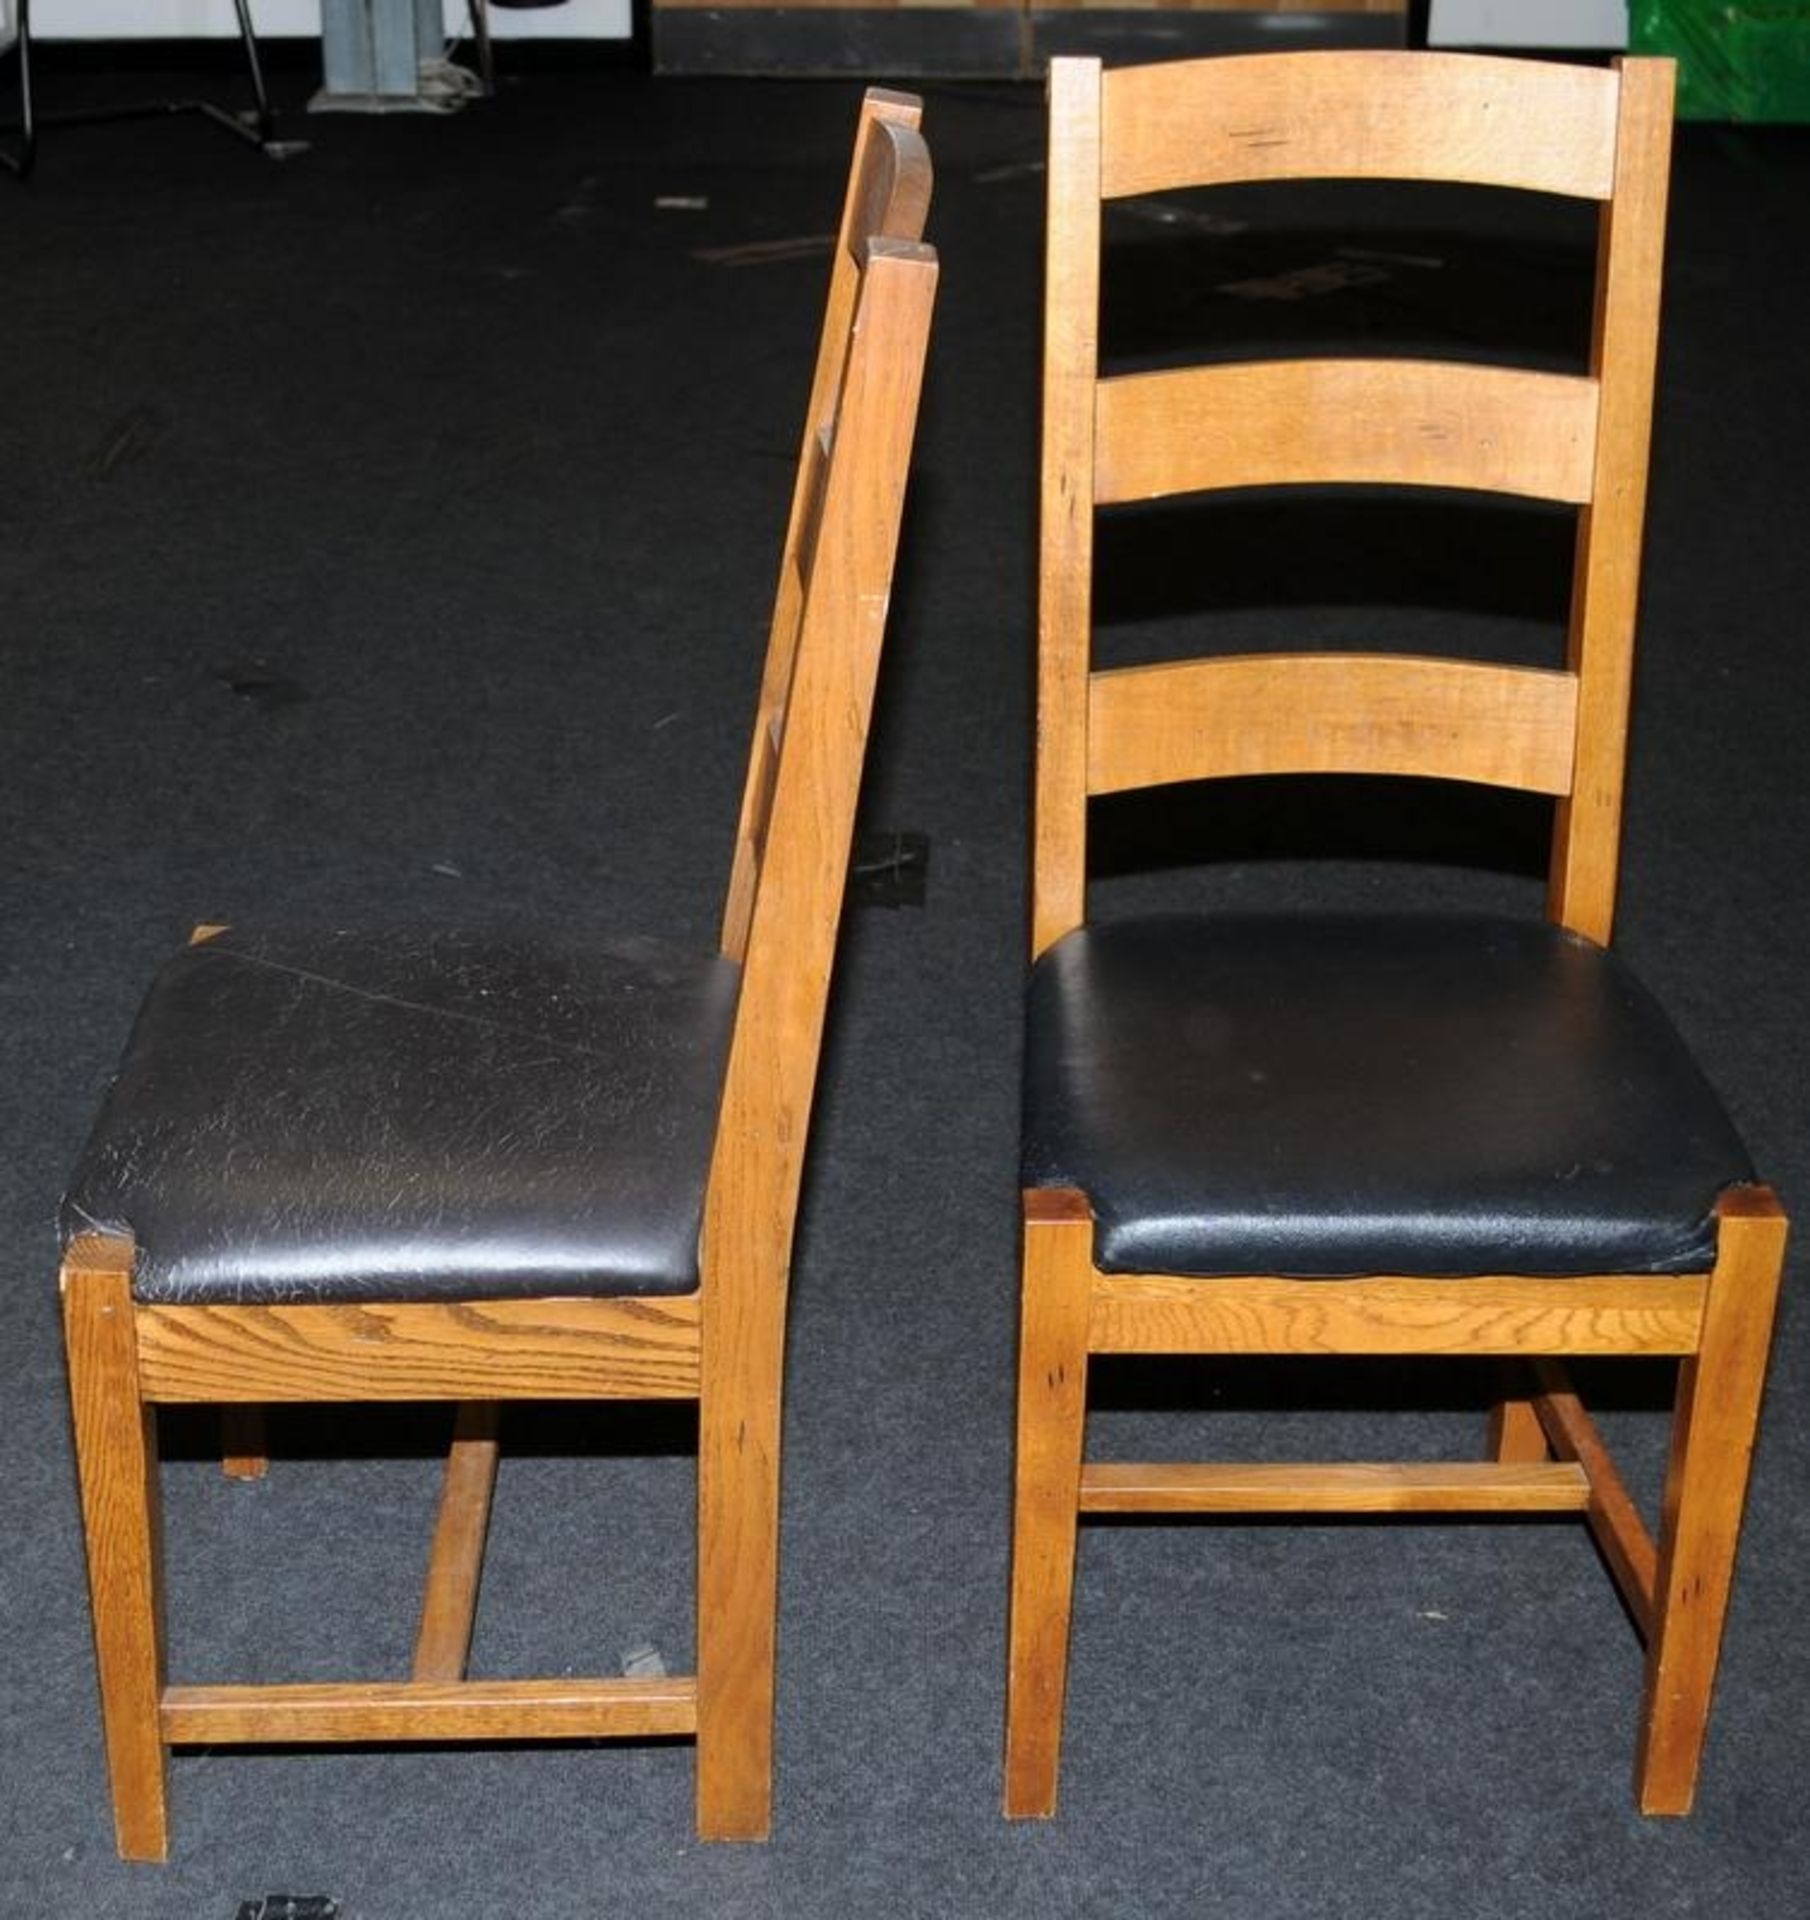 Pair high ladder back dining chairs set on squared legs with vinyl seat covering 105x45x45cm - Image 2 of 3